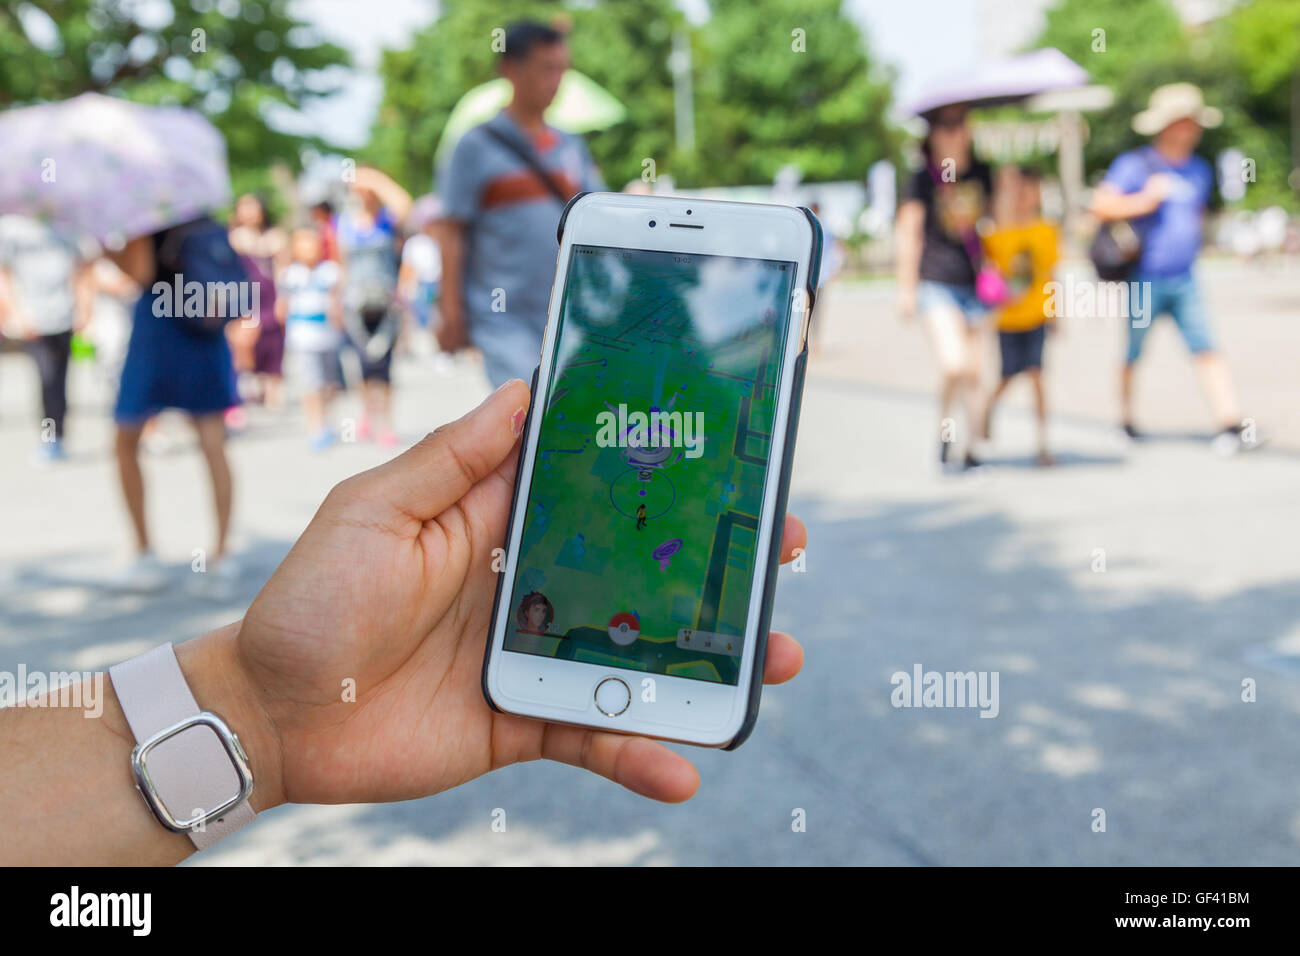 A Man Uses A Gps Controller In Pokemon Go Game At The Sensoji Temple Stock Photo Alamy